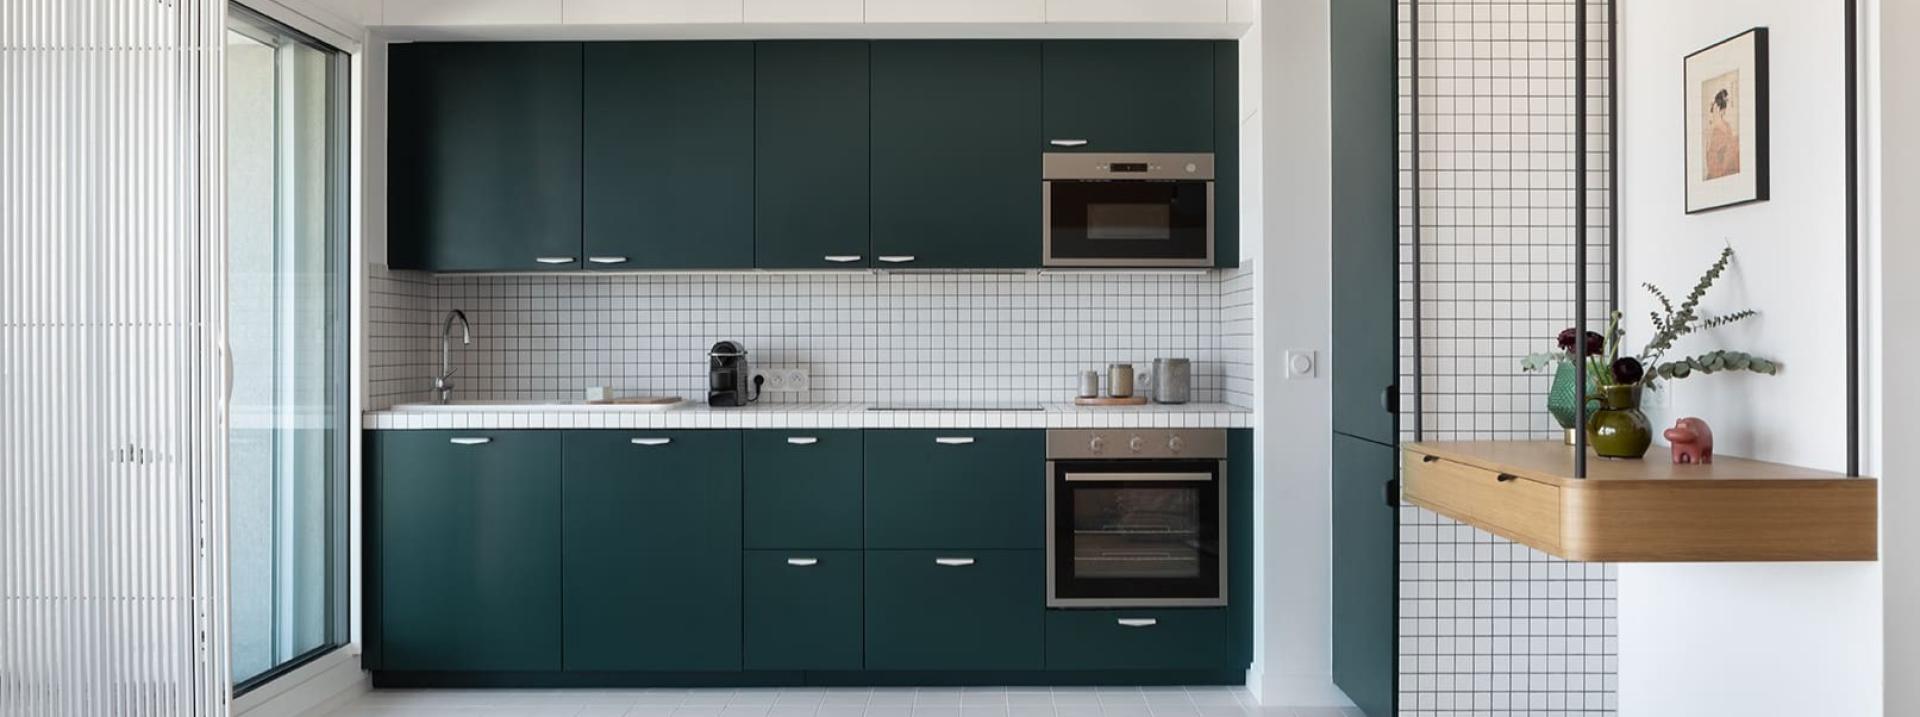 KITCHEN IN SMOOTH GREEN 02 - SOMBRE FOREST